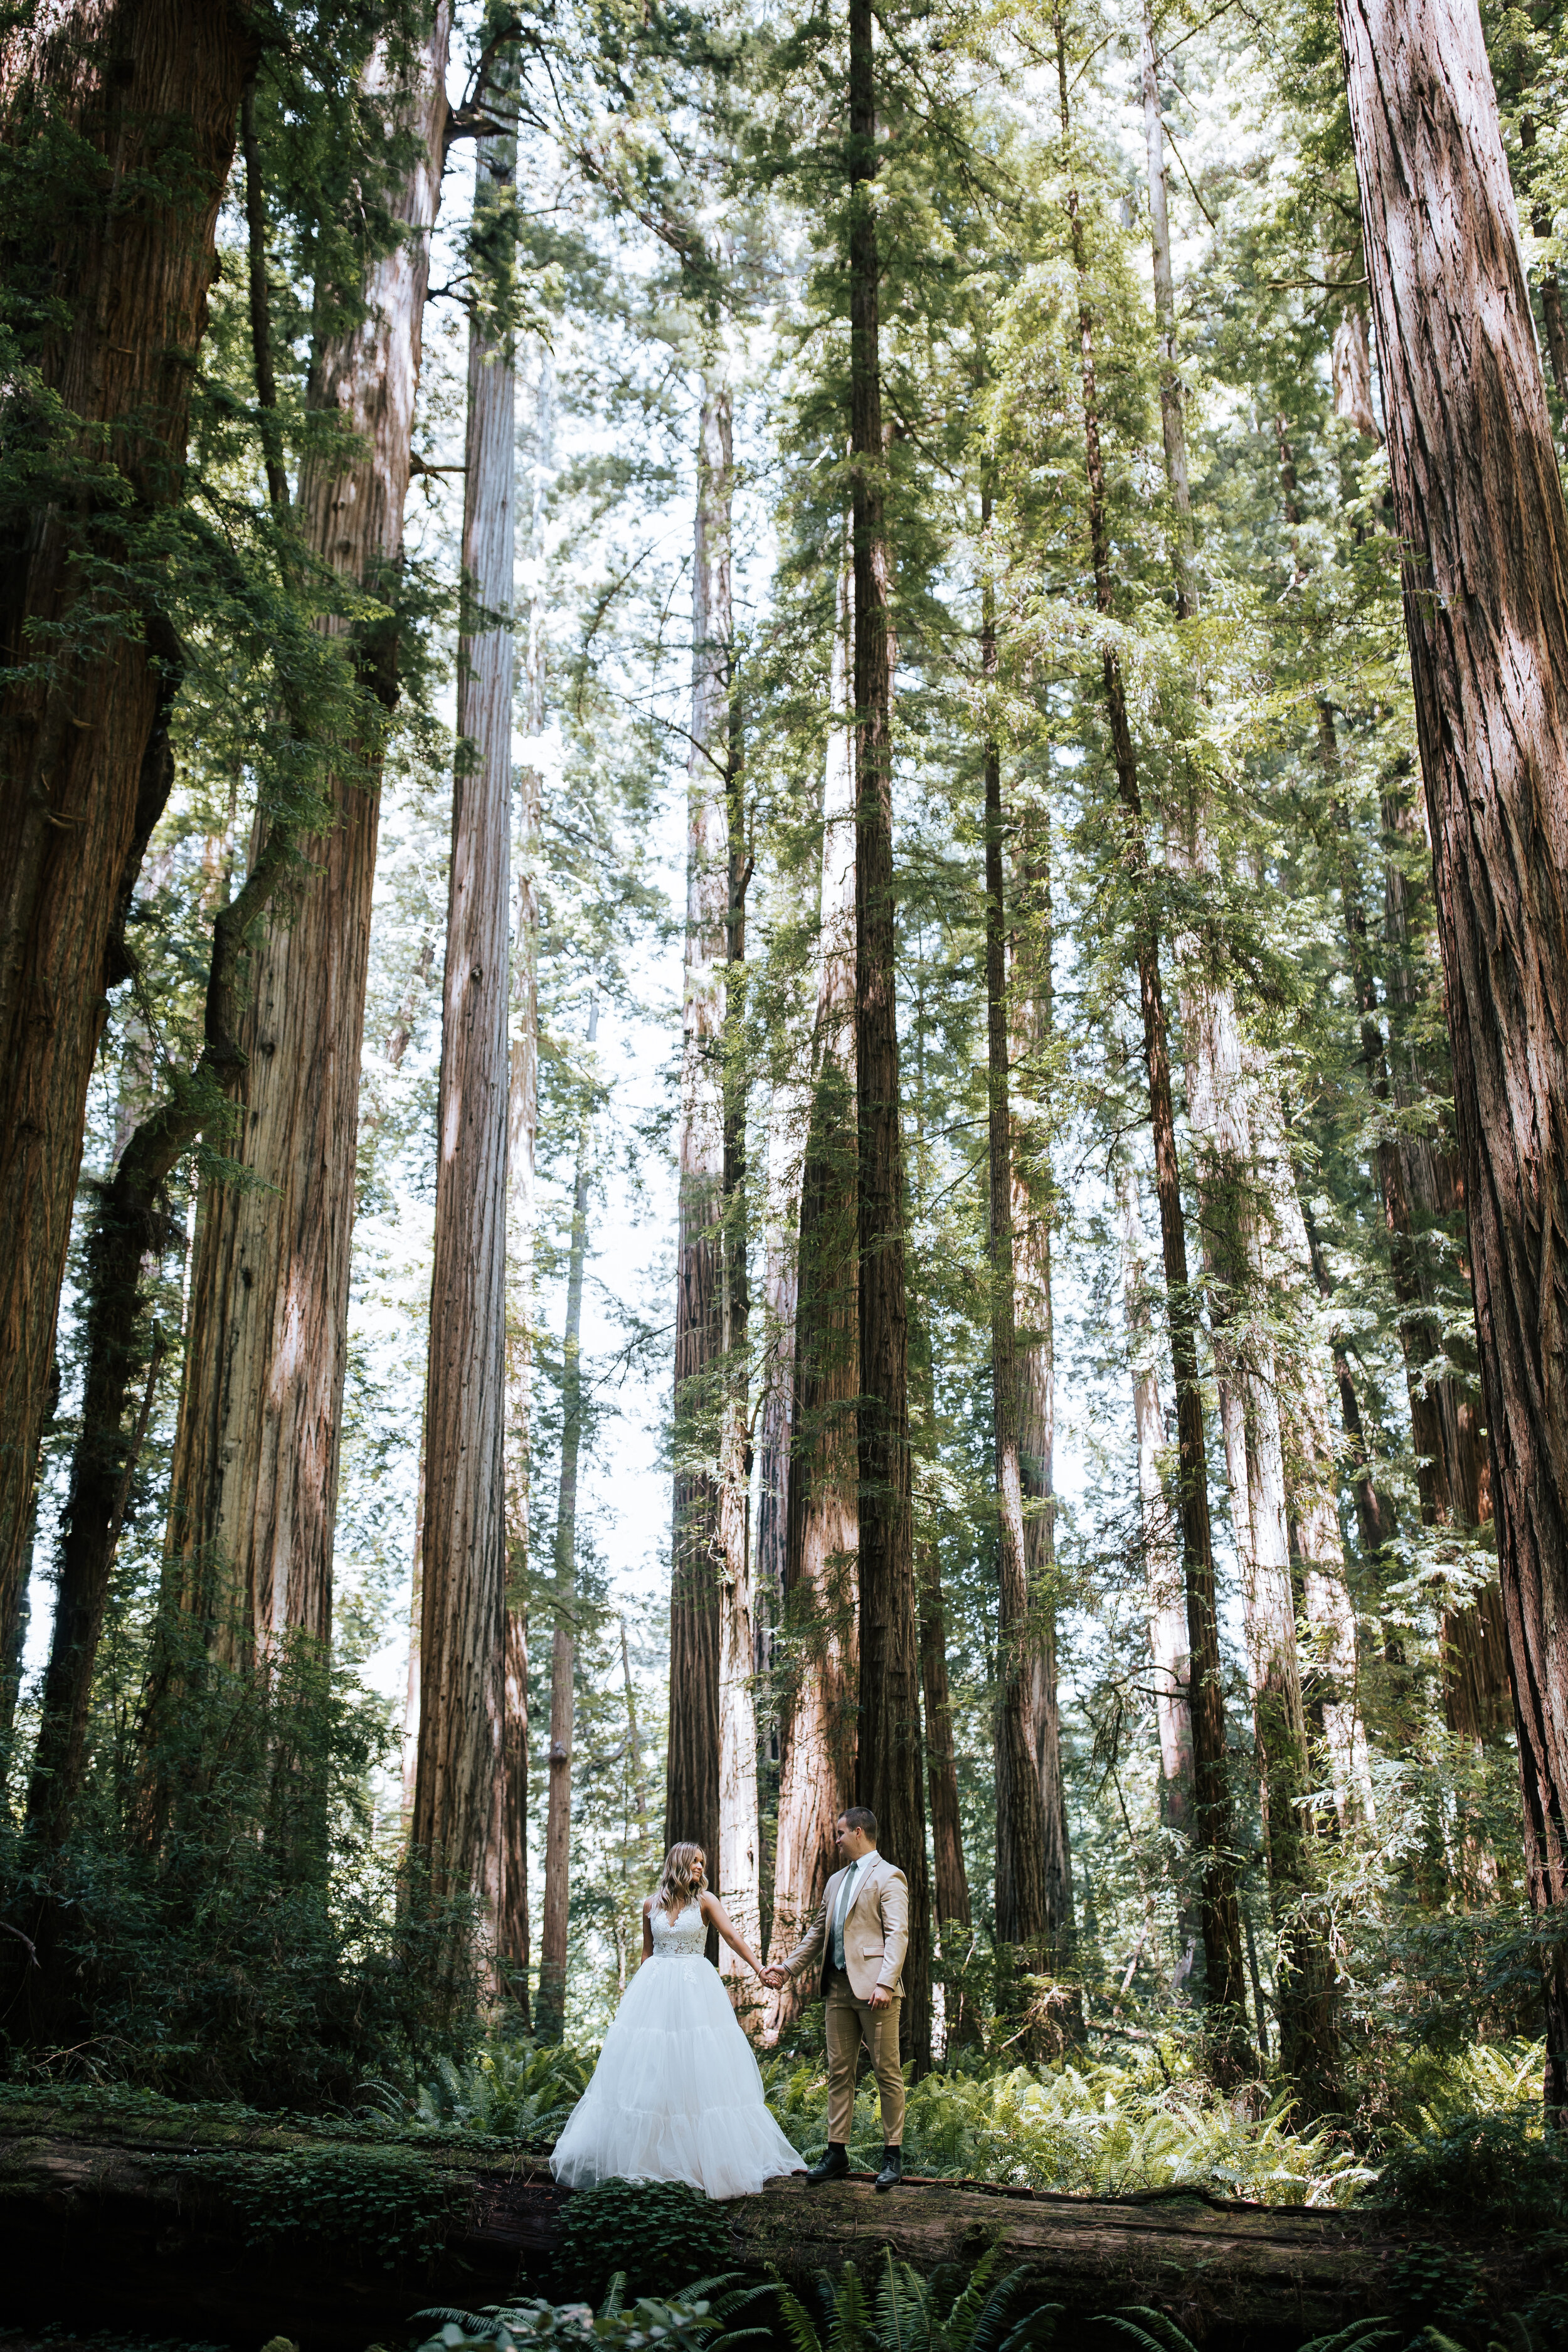  Bride and groom eloping in the Redwoods in California. Close up bride and groom. Redwoods elopement photographer wedding in Redwoods National Park. Elopement in the forest. Wedding attire wedding dress inspo Redwoods bridals #californiaphotographer 